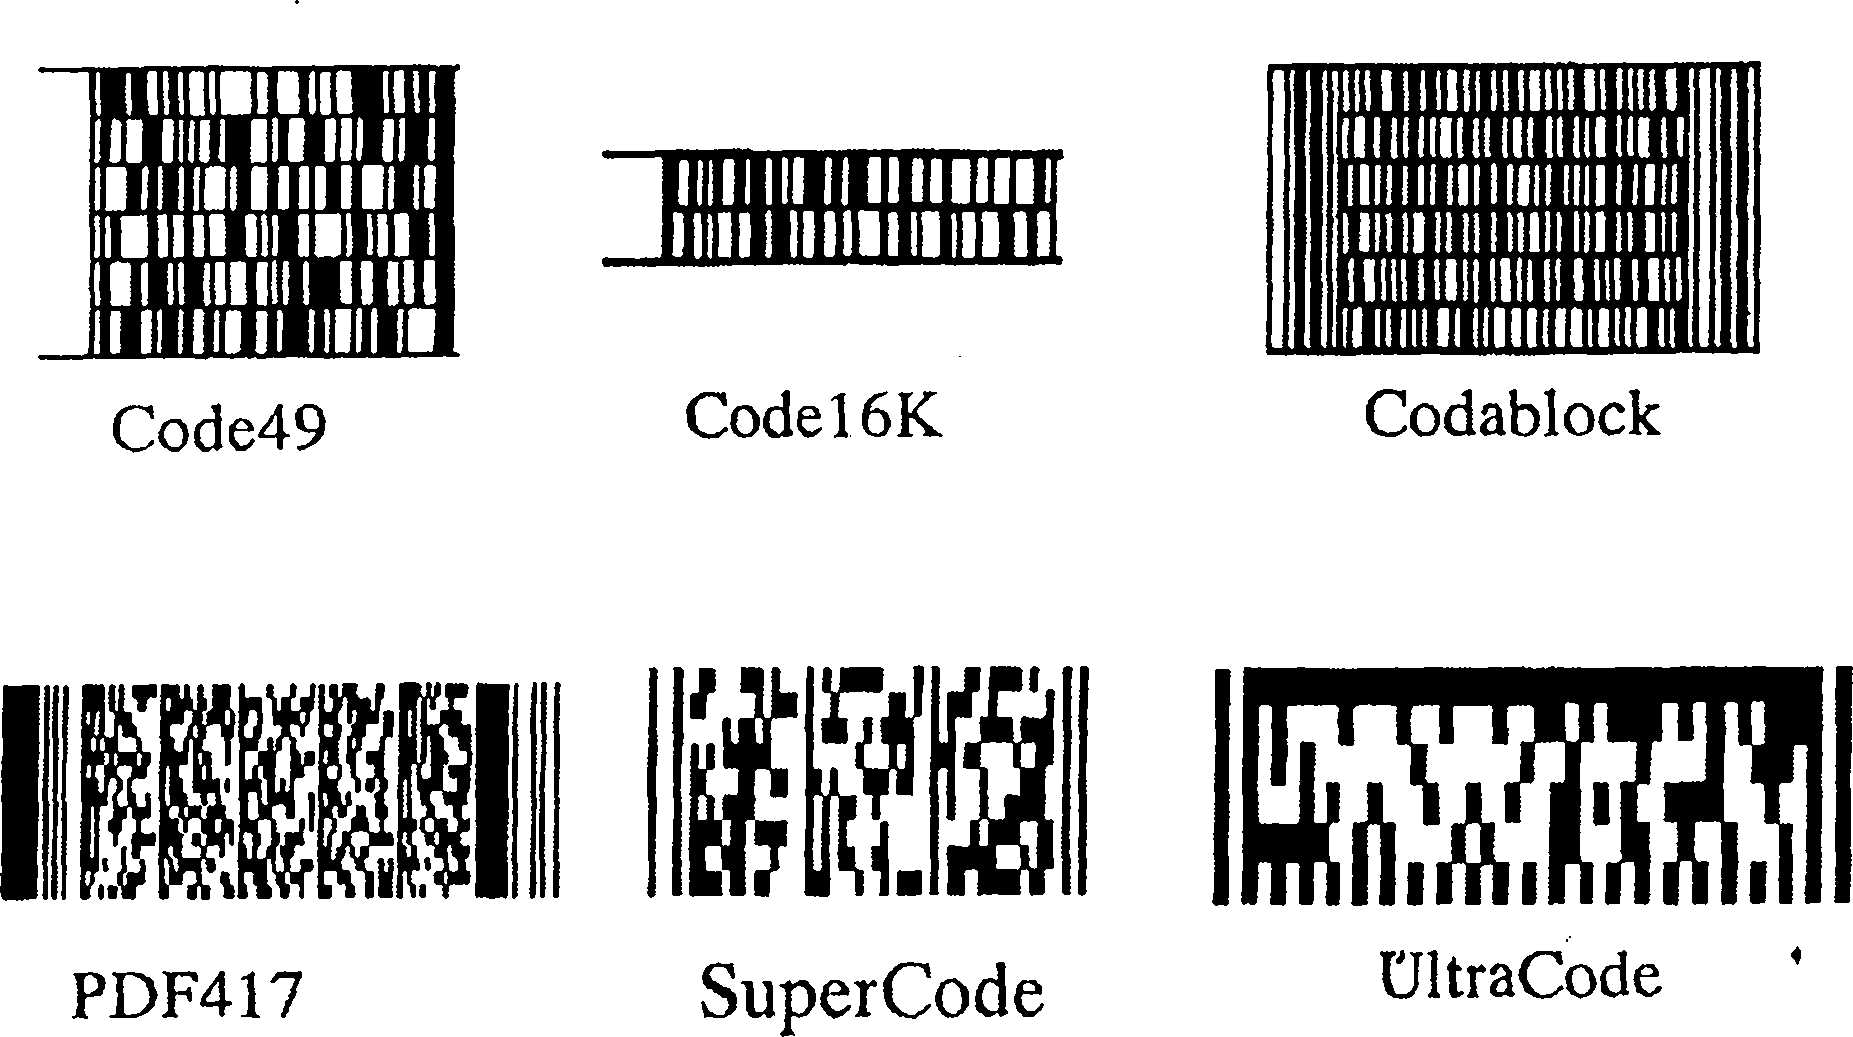 Processing method for novel anti-counterfeiting label